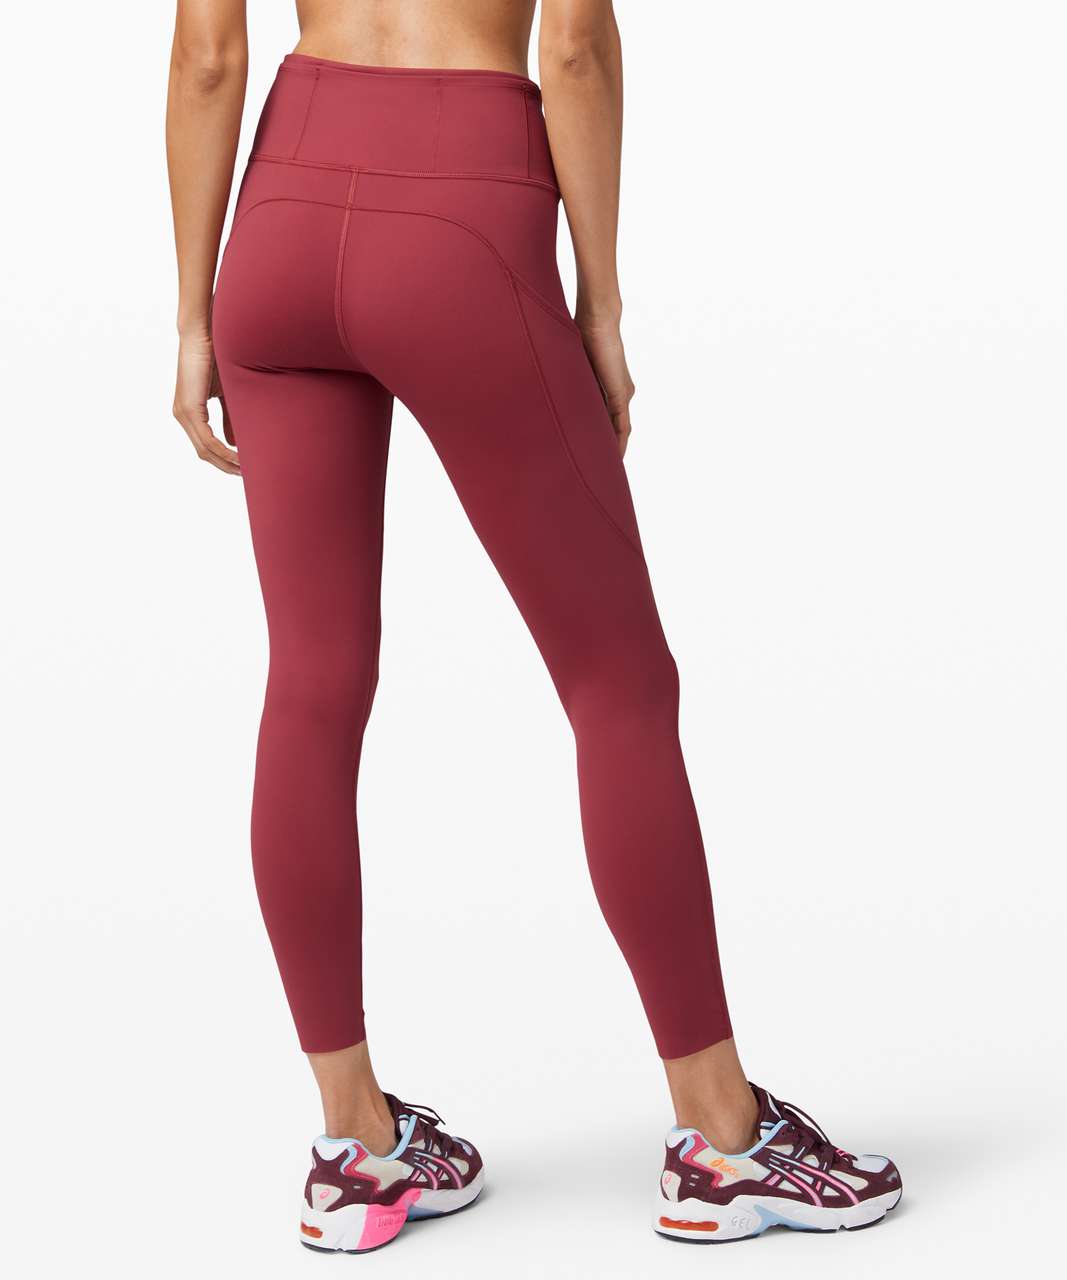 Lululemon Fast and Free Tight II 25" *Non-Reflective Nulux - Chianti